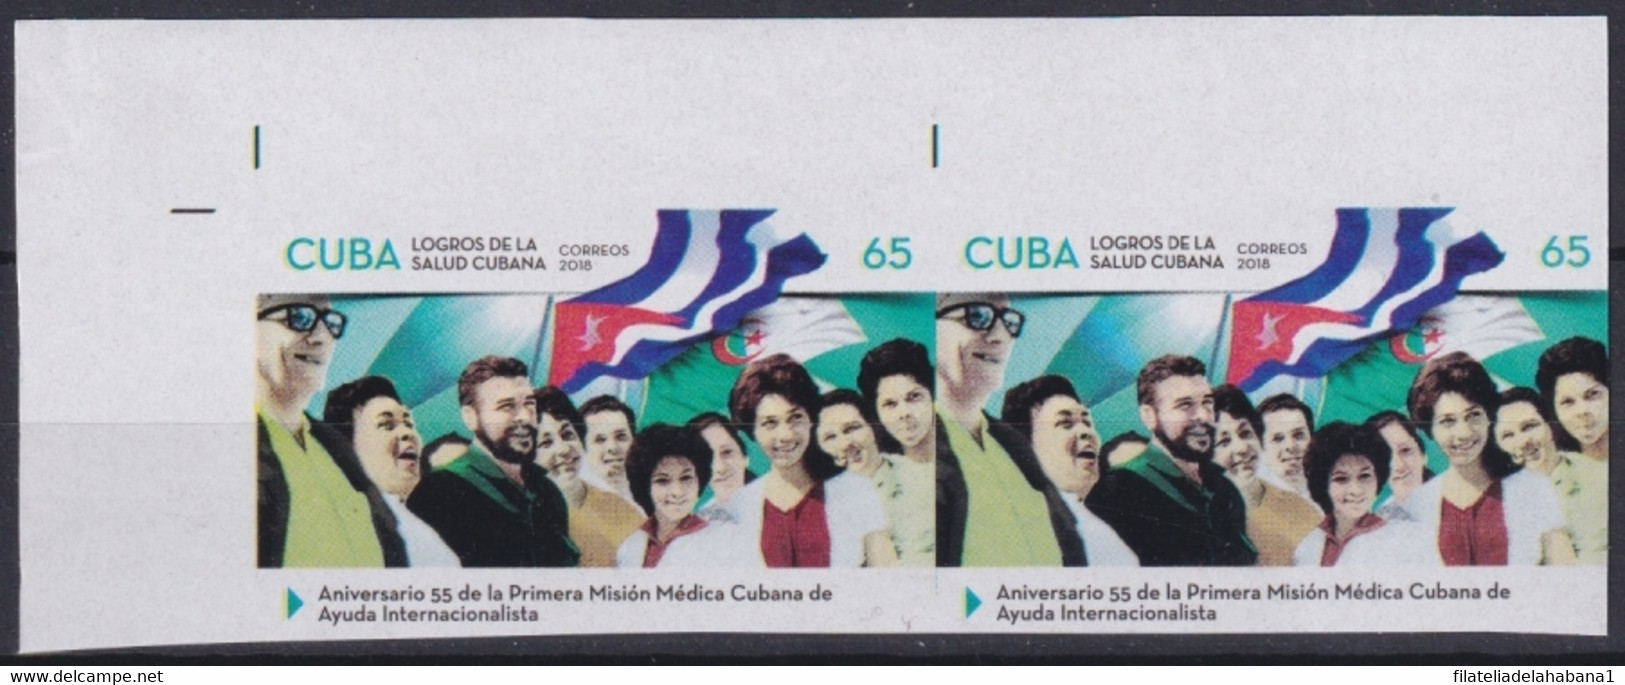 2018.224 CUBA MNH 2018 IMPERFORATED PROOF 65c ANIV MISION MEDICA ERNESTO CHE GUEVARA. - Imperforates, Proofs & Errors